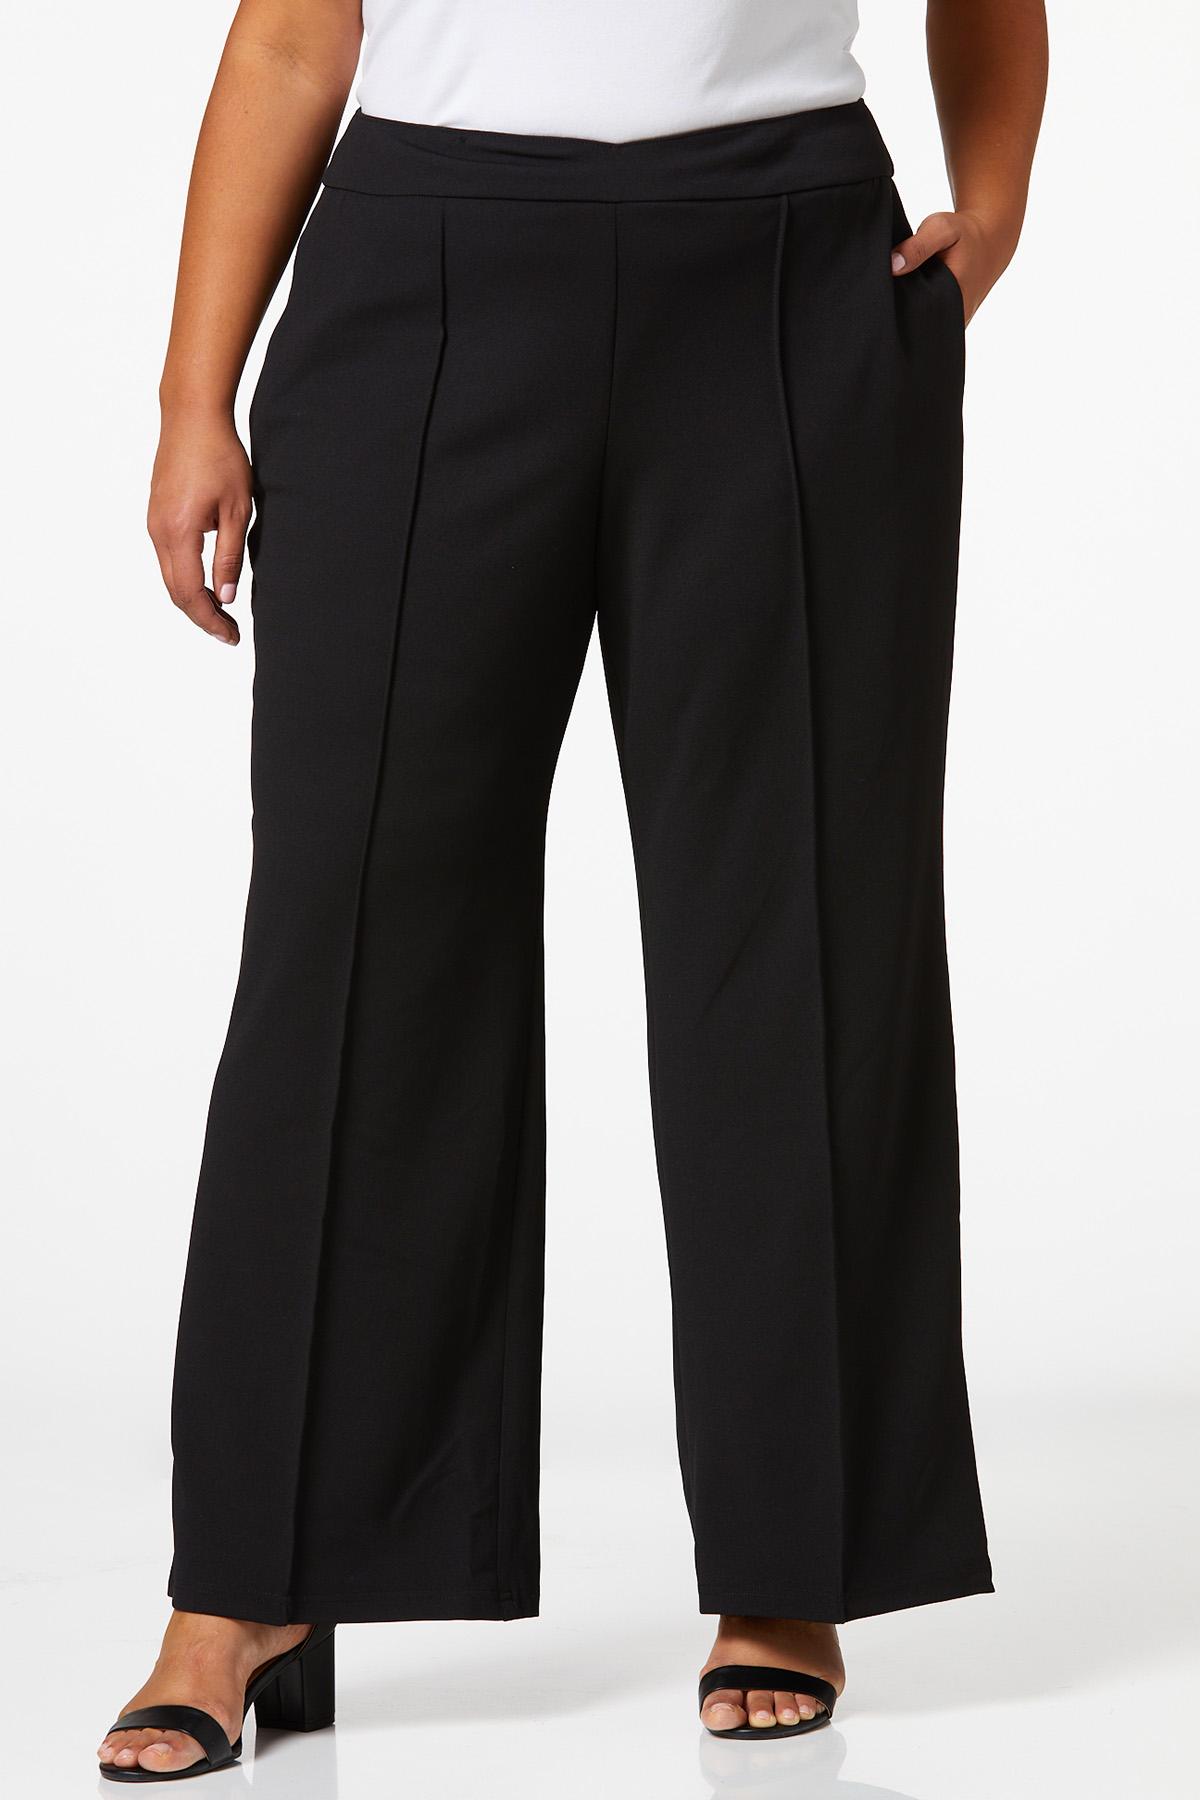 Cato Fashions  Cato Plus Size Stretchy Crepe Trouser Pants